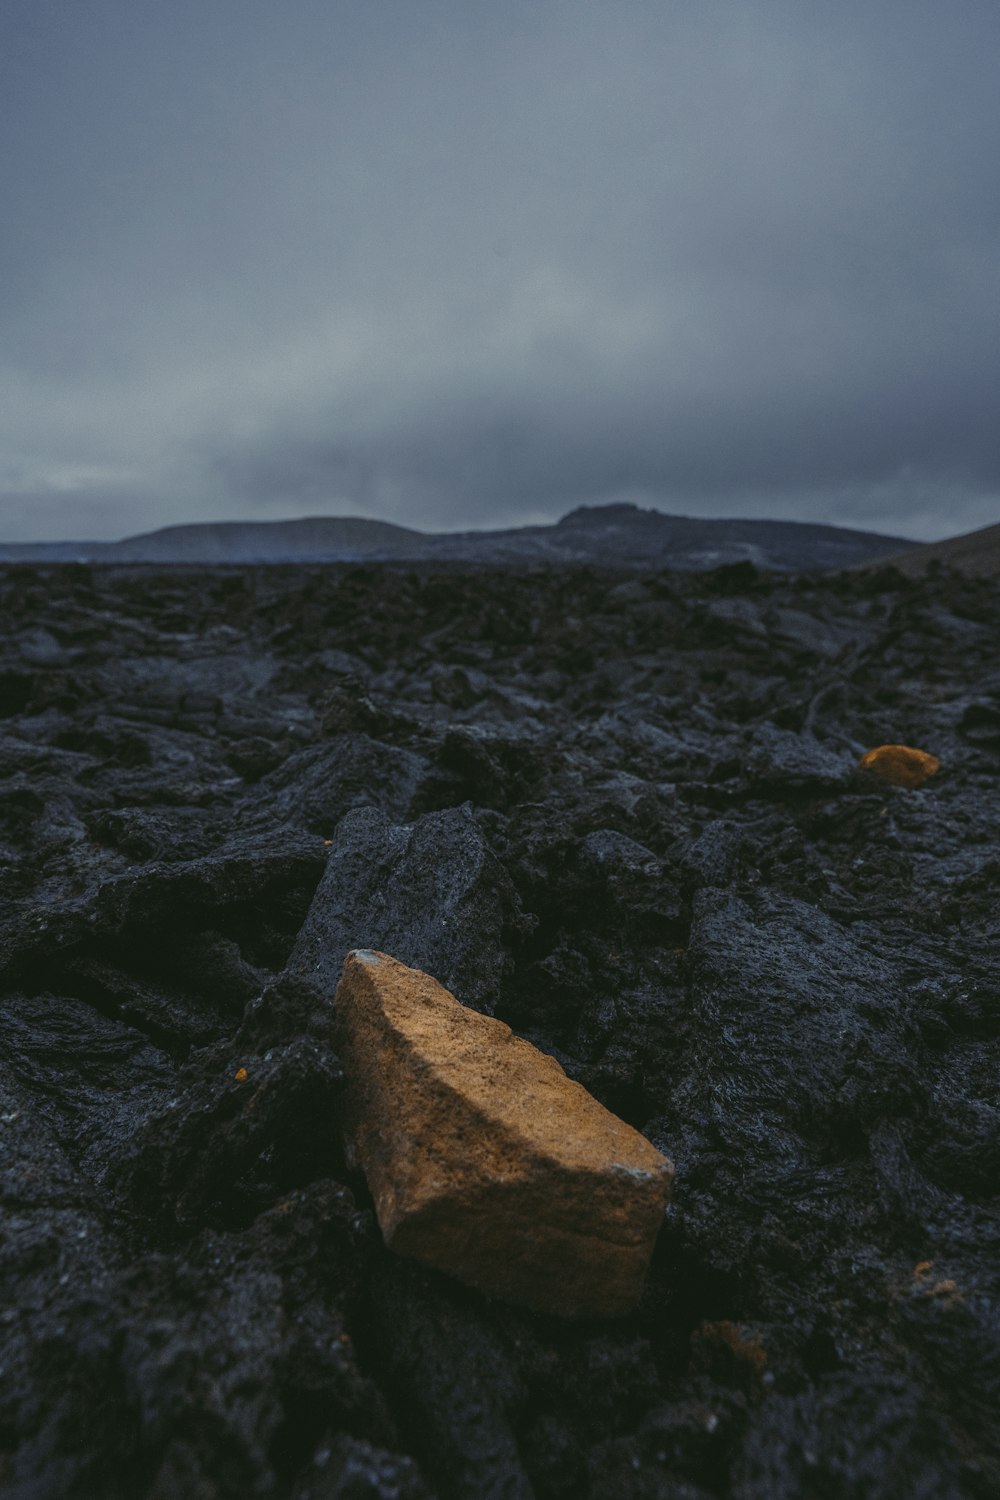 a rock on the ground with a cloudy sky in the background